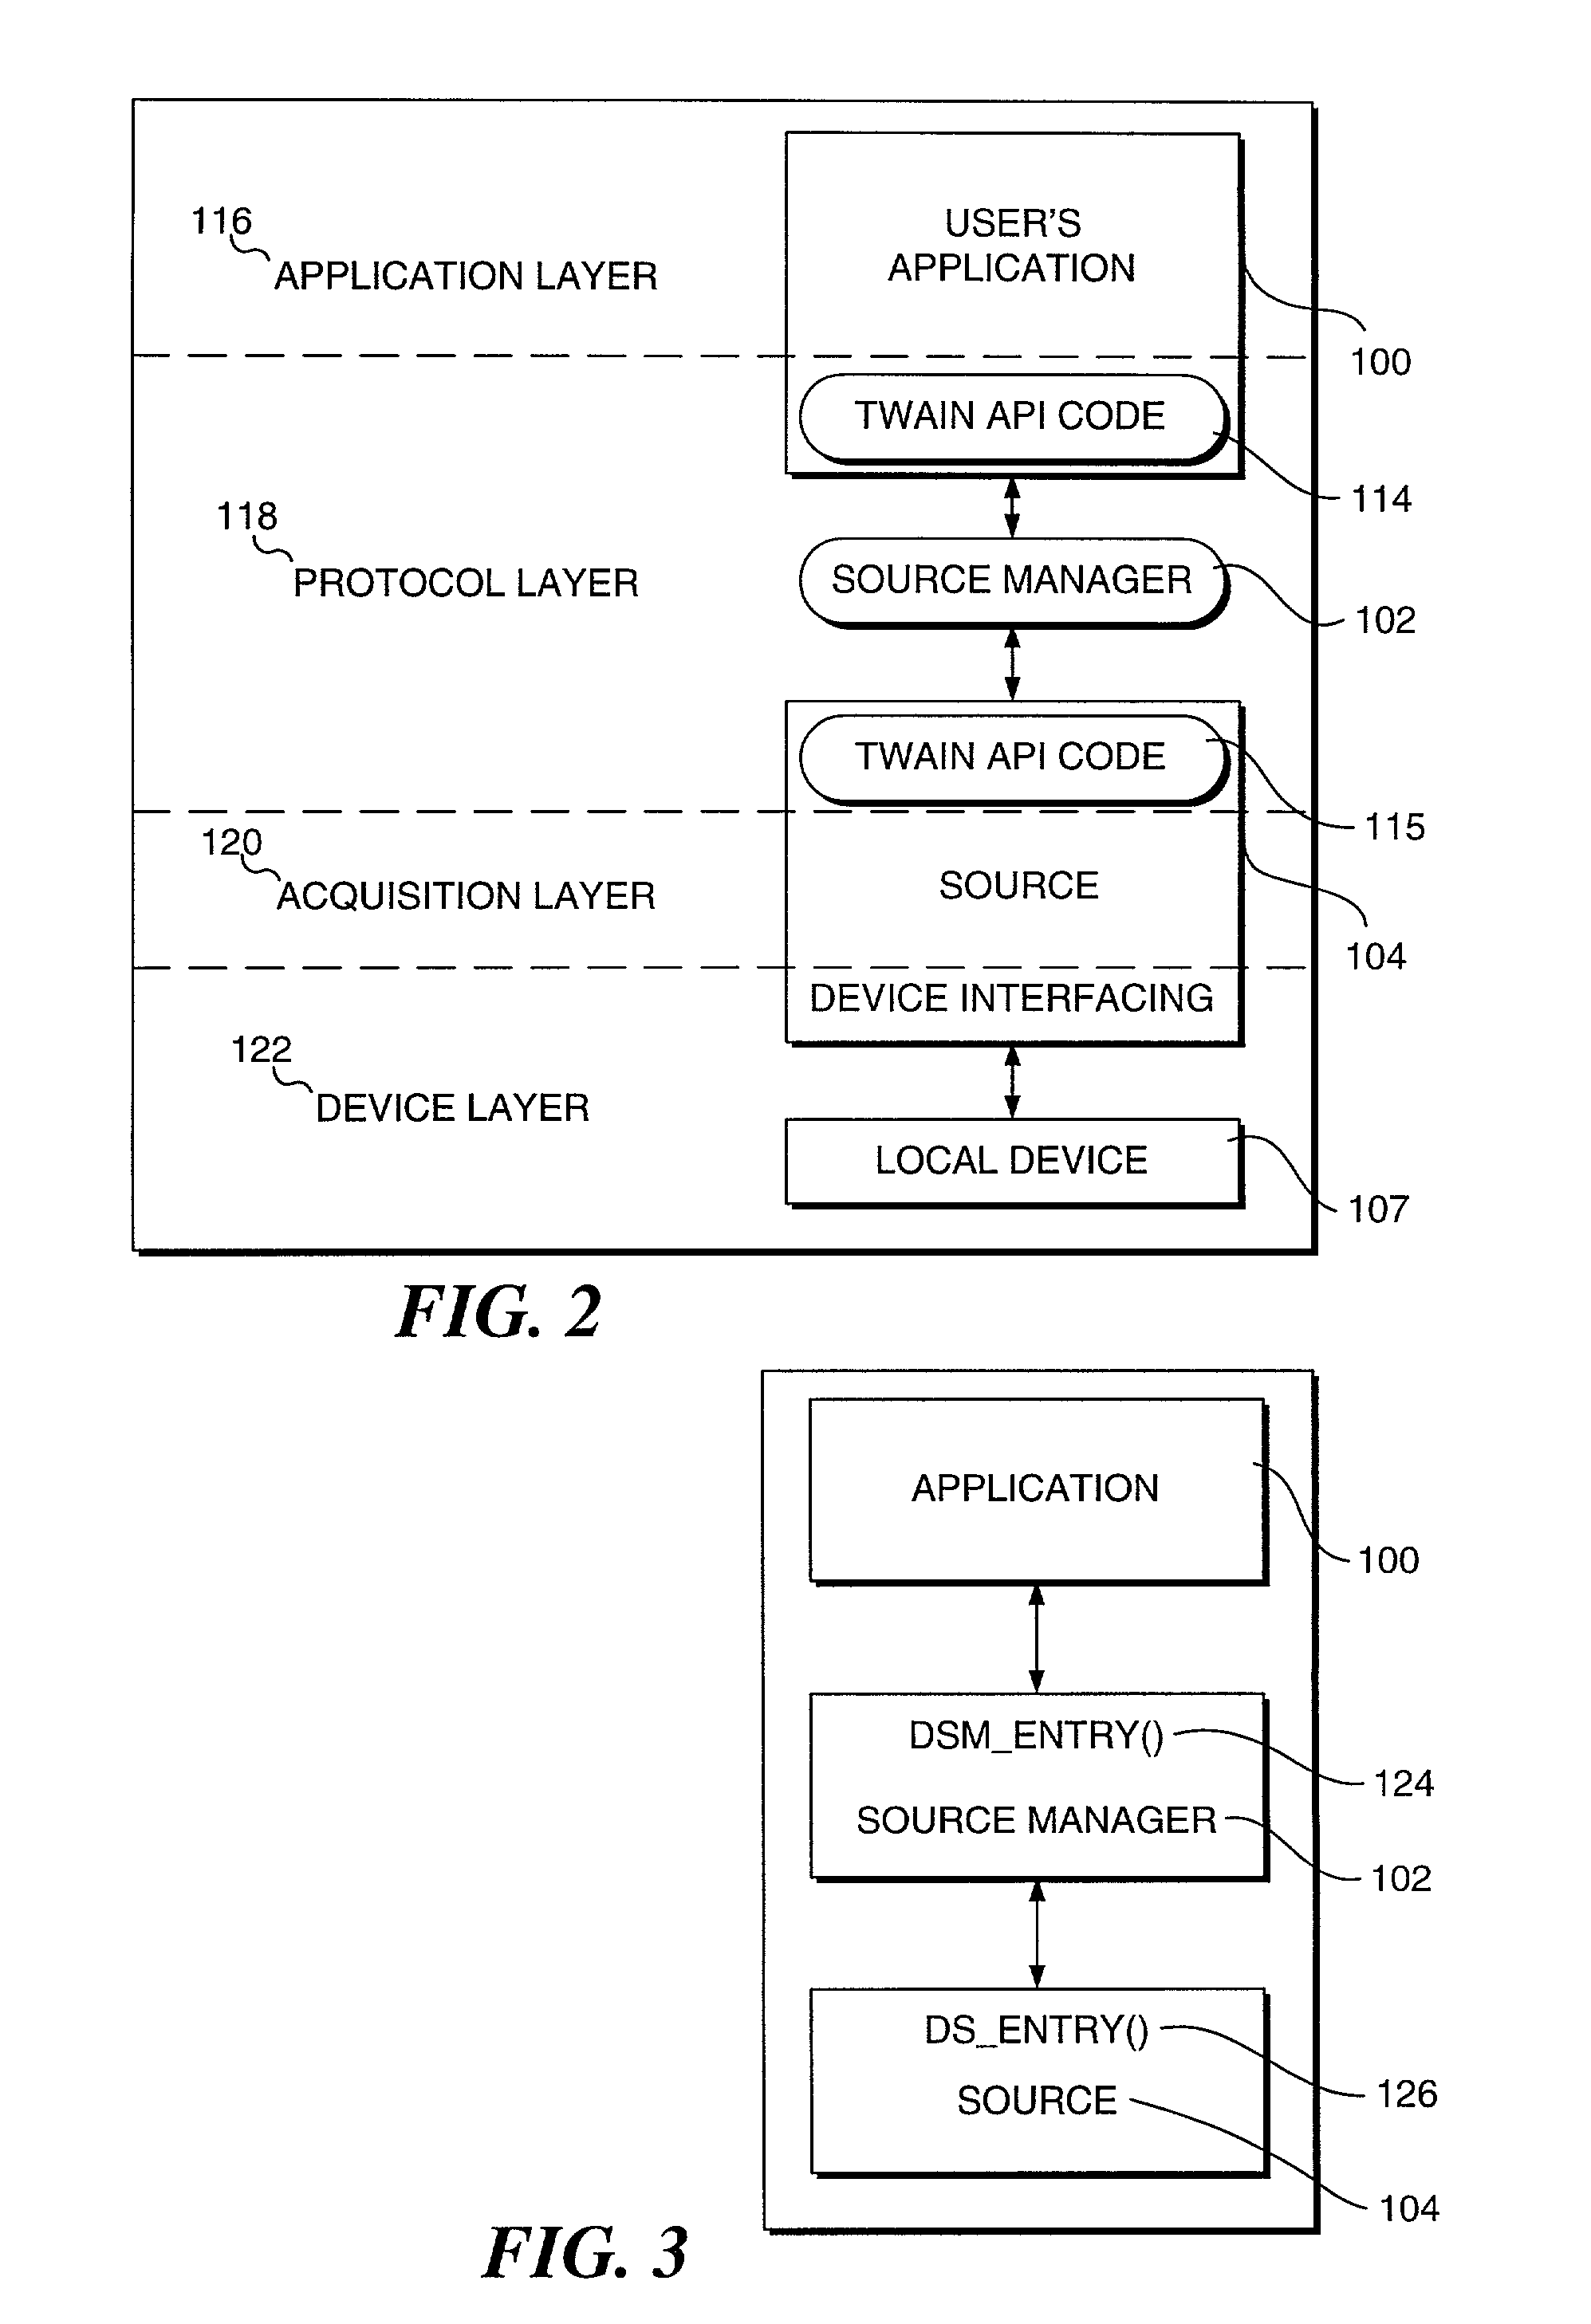 Special API interface for interfacing an application with a TWAIN module, negotiating and presenting a user interface for inserting an image into a document